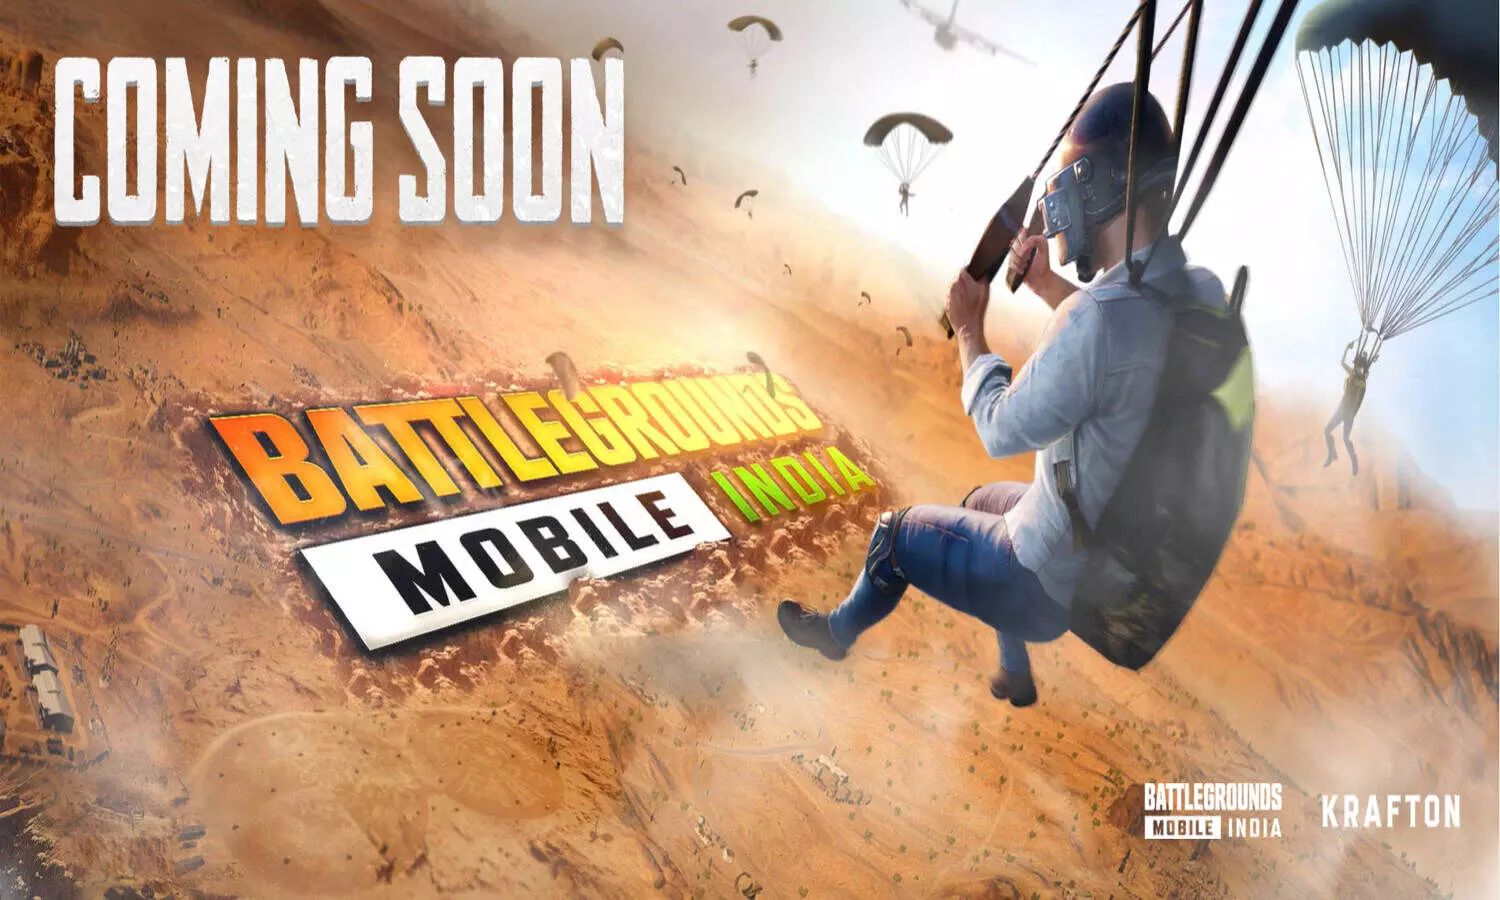 PUBG fans, its time for Winner winner chicken dinner, as game is relaunching as Battlegrounds Mobile India